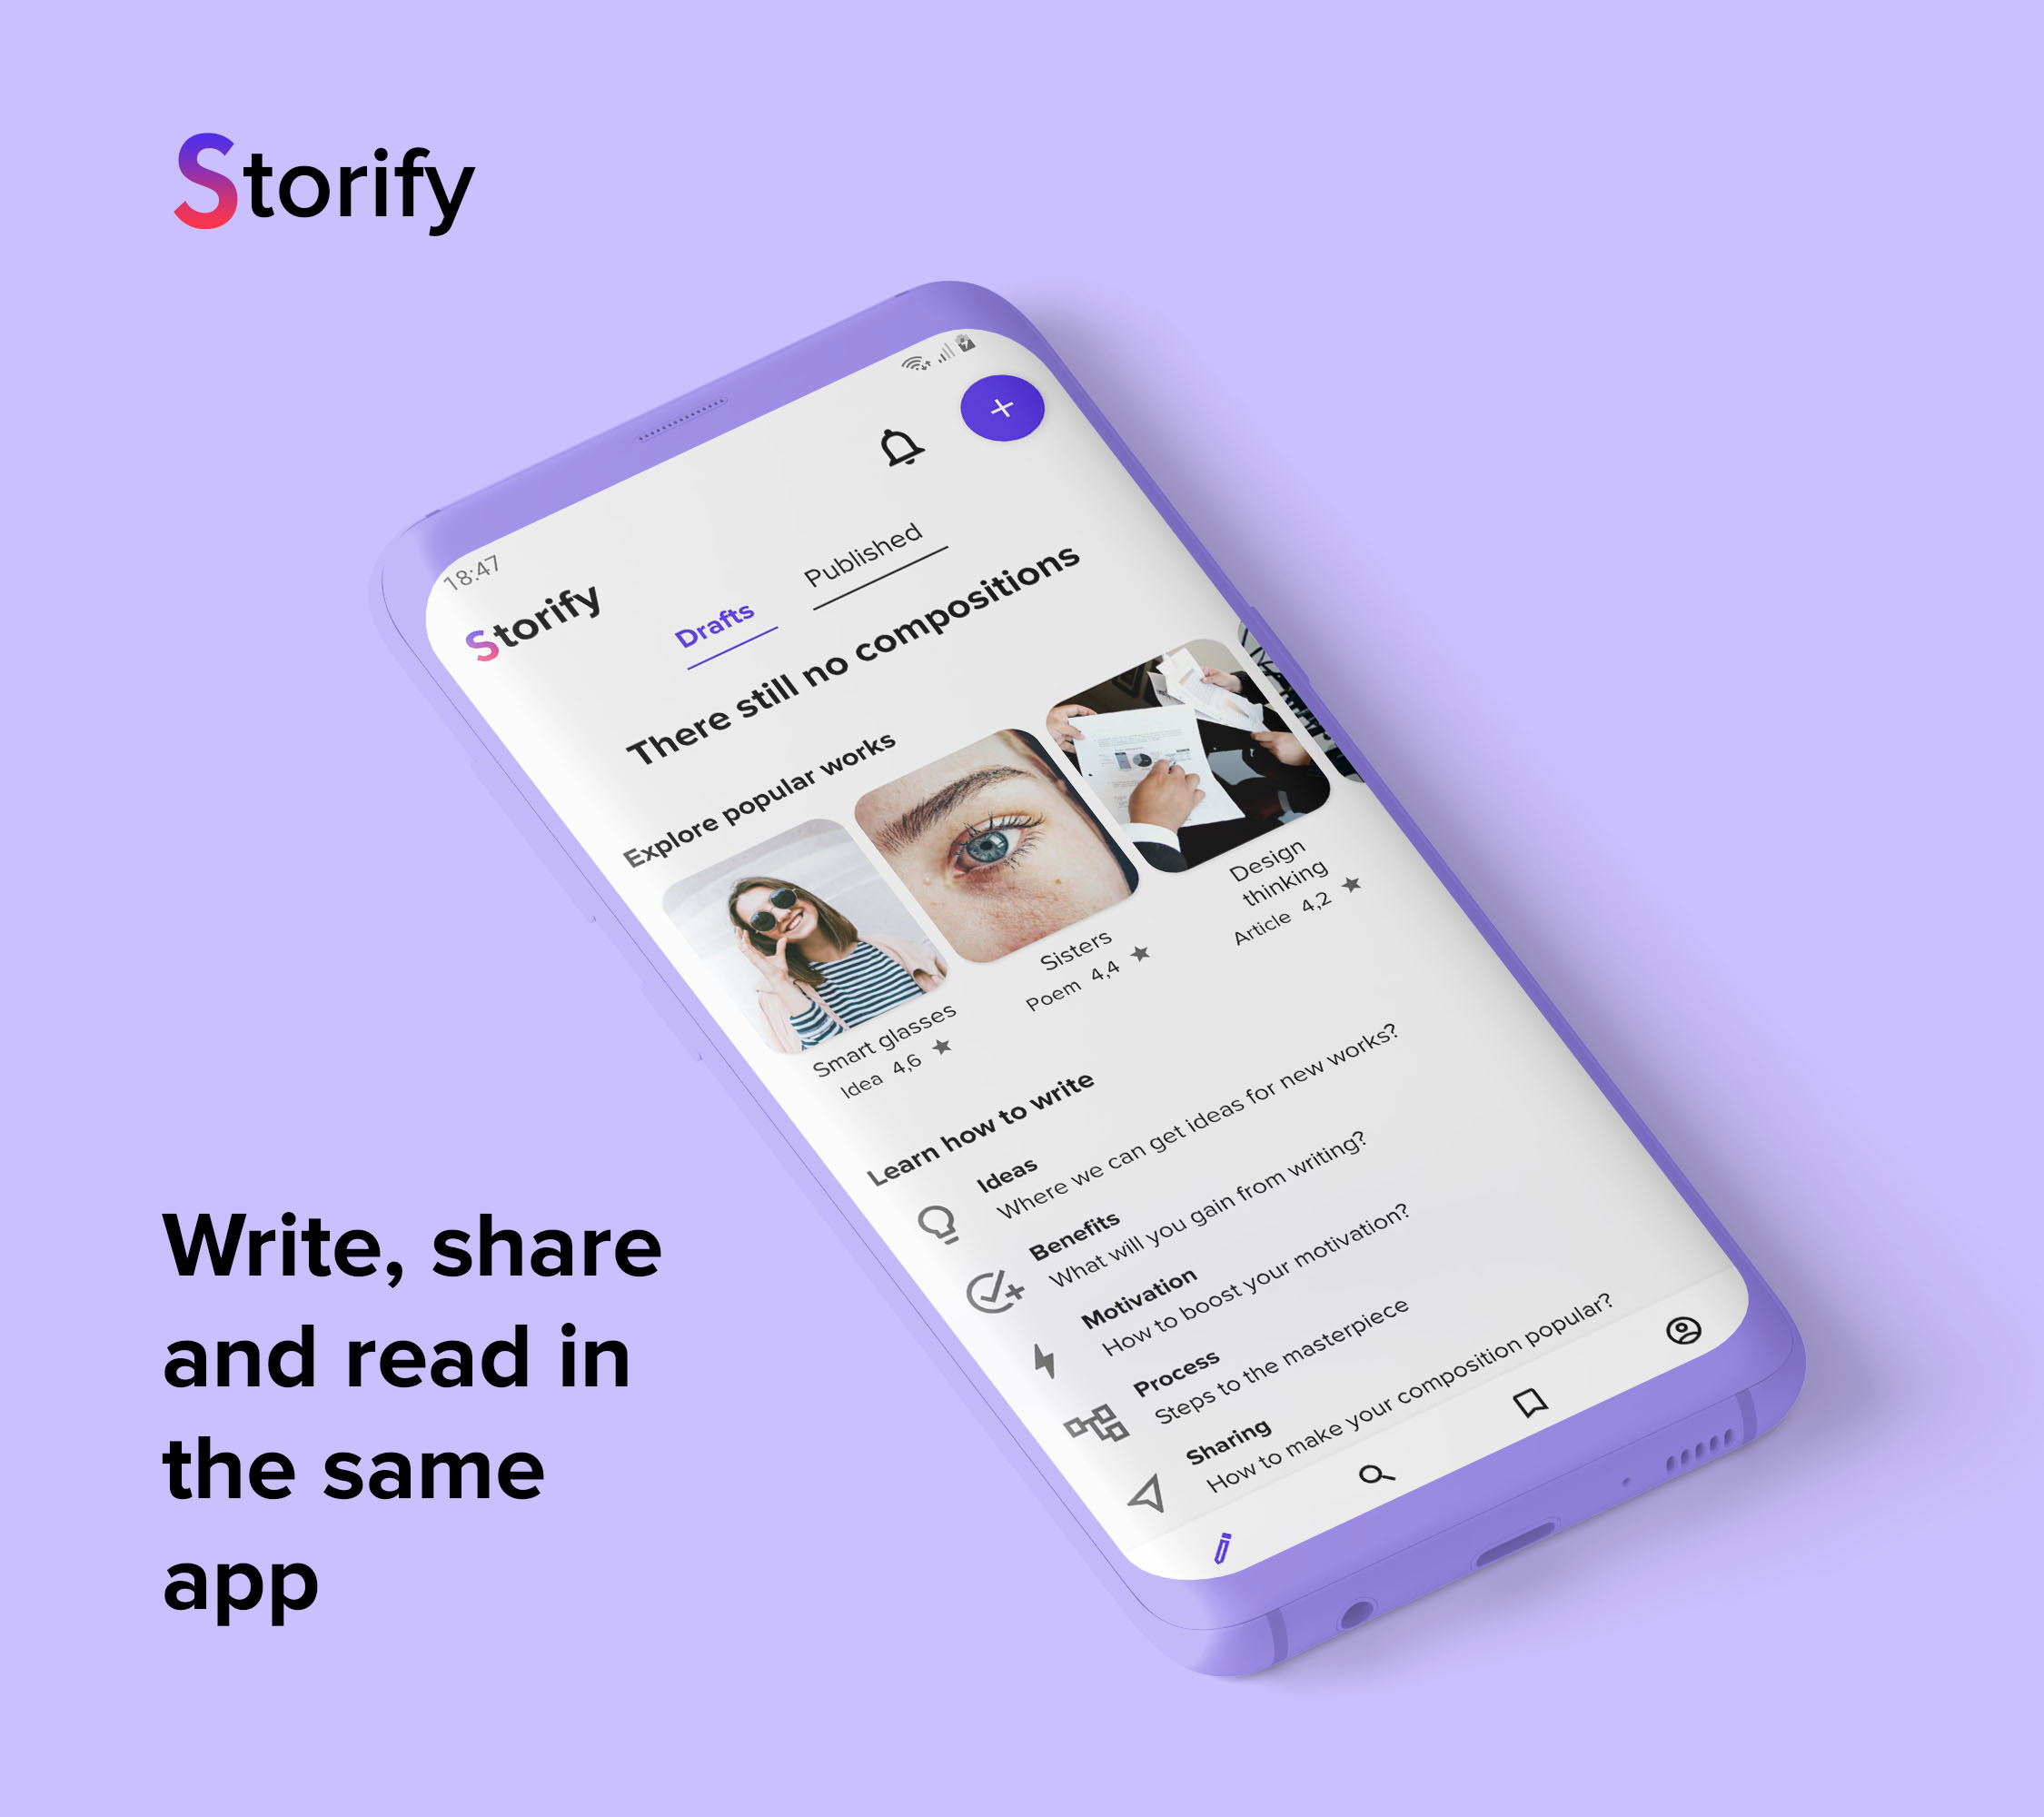 Storify: write, share and read